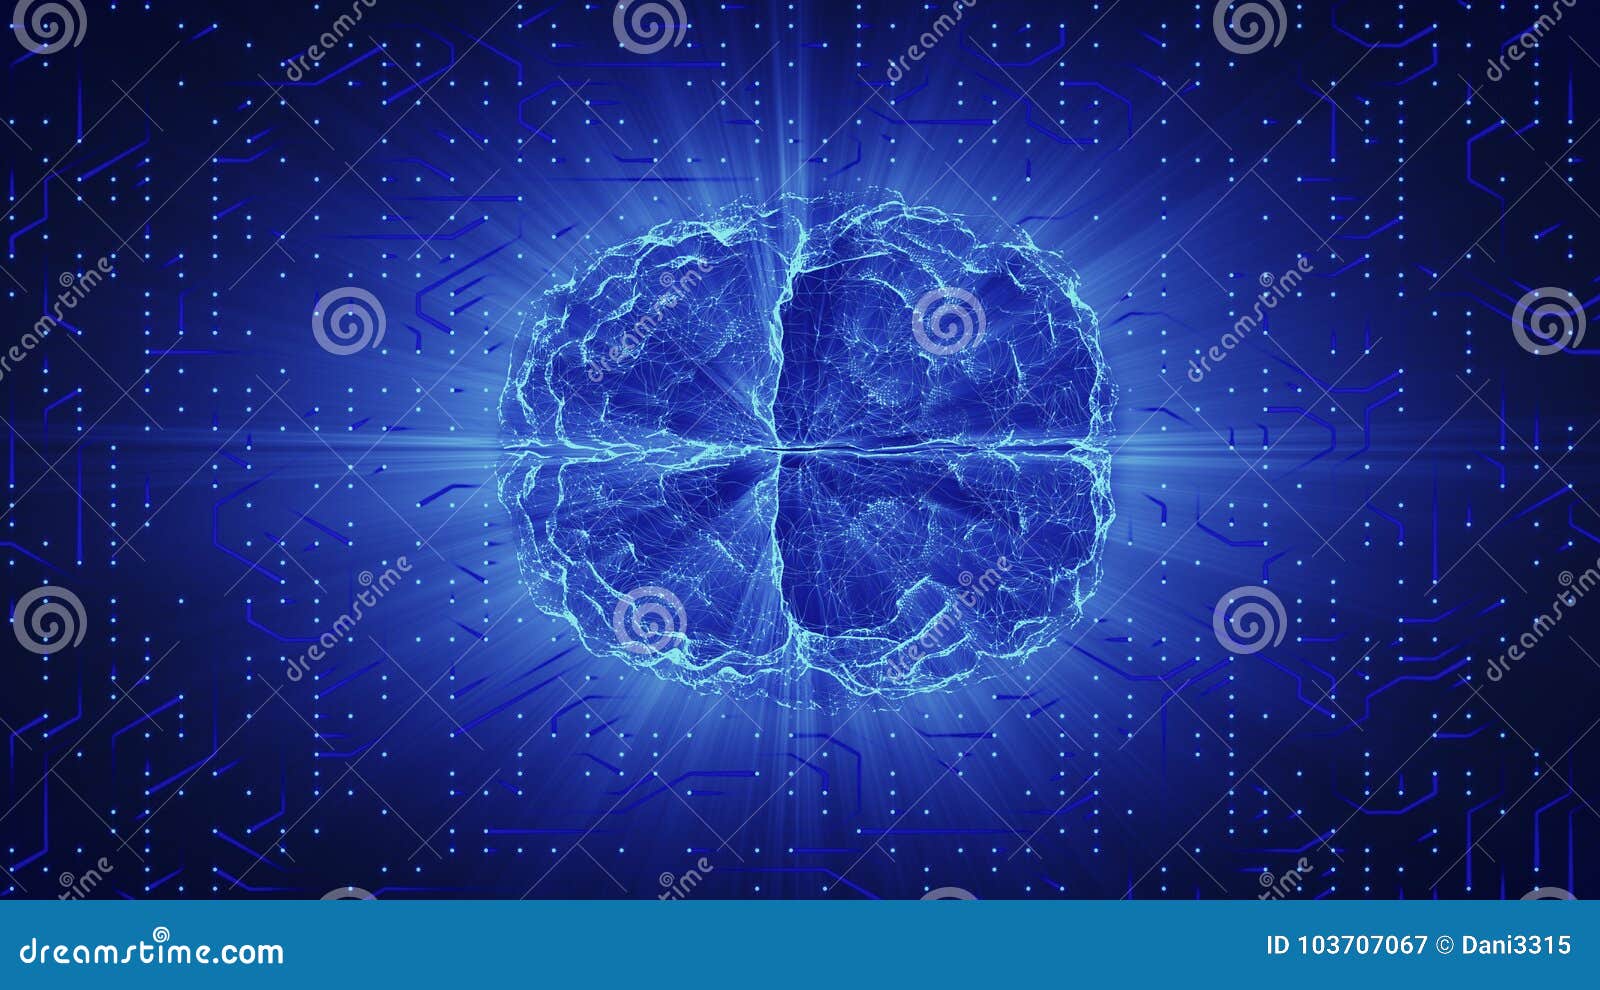 blue glowing brain wired on neural surface or electronic conductors.